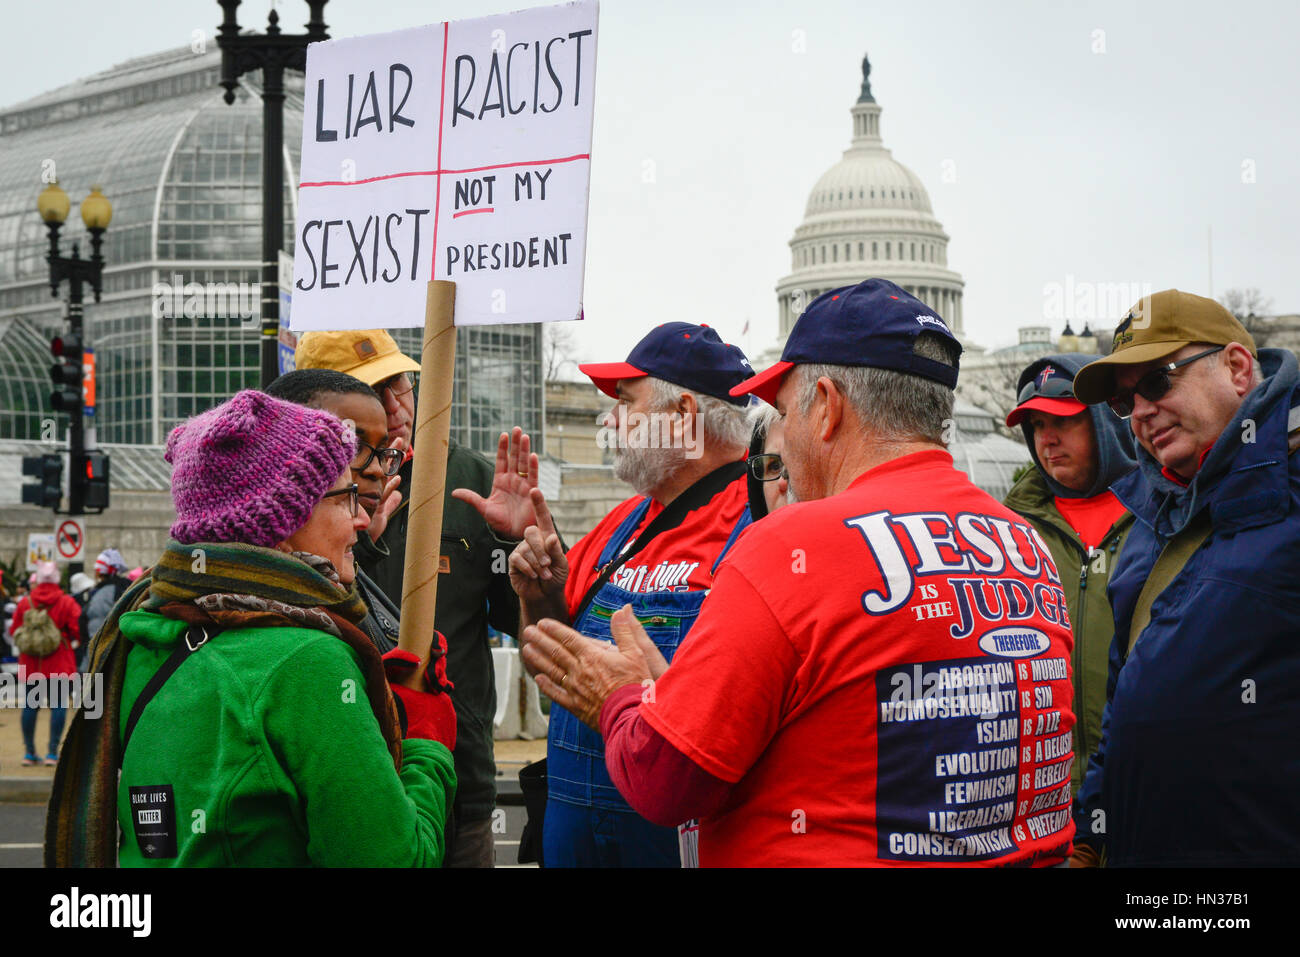 Protesters at Women's March on Washington, DC on January 21, 2017 get into arguments with Religious evangelical demonstrators Stock Photo